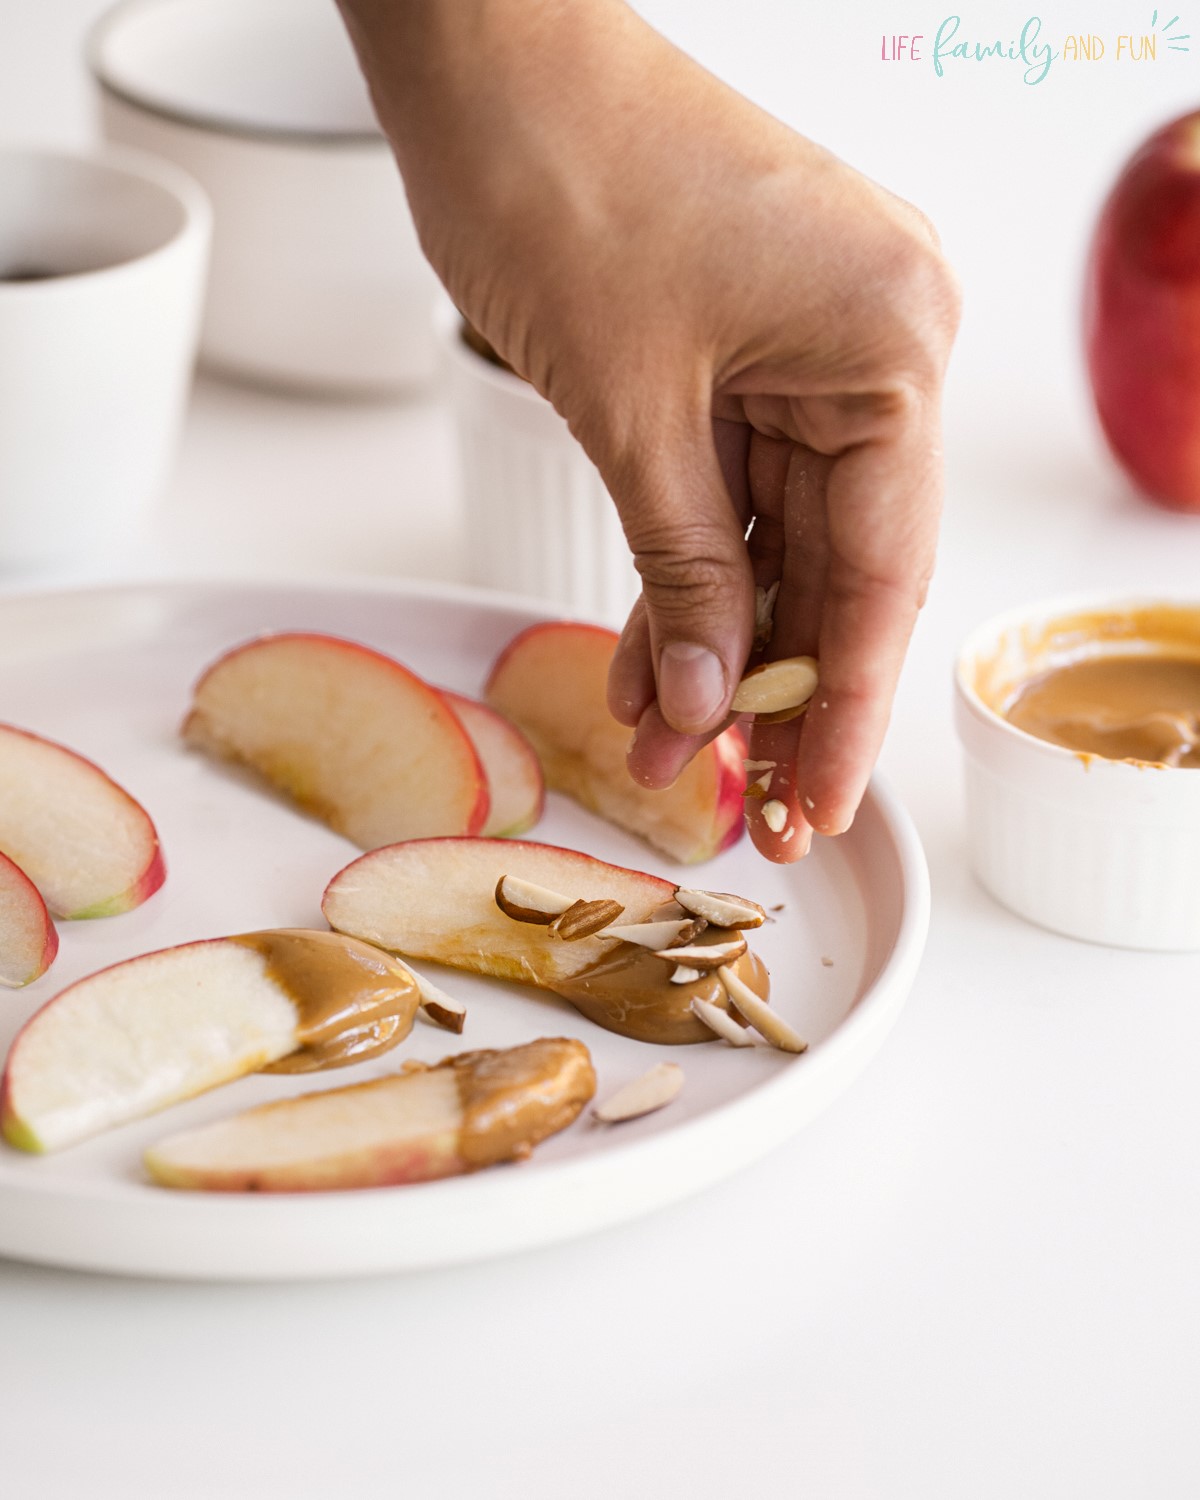 Apple Slices with Peanut Butter - on plate